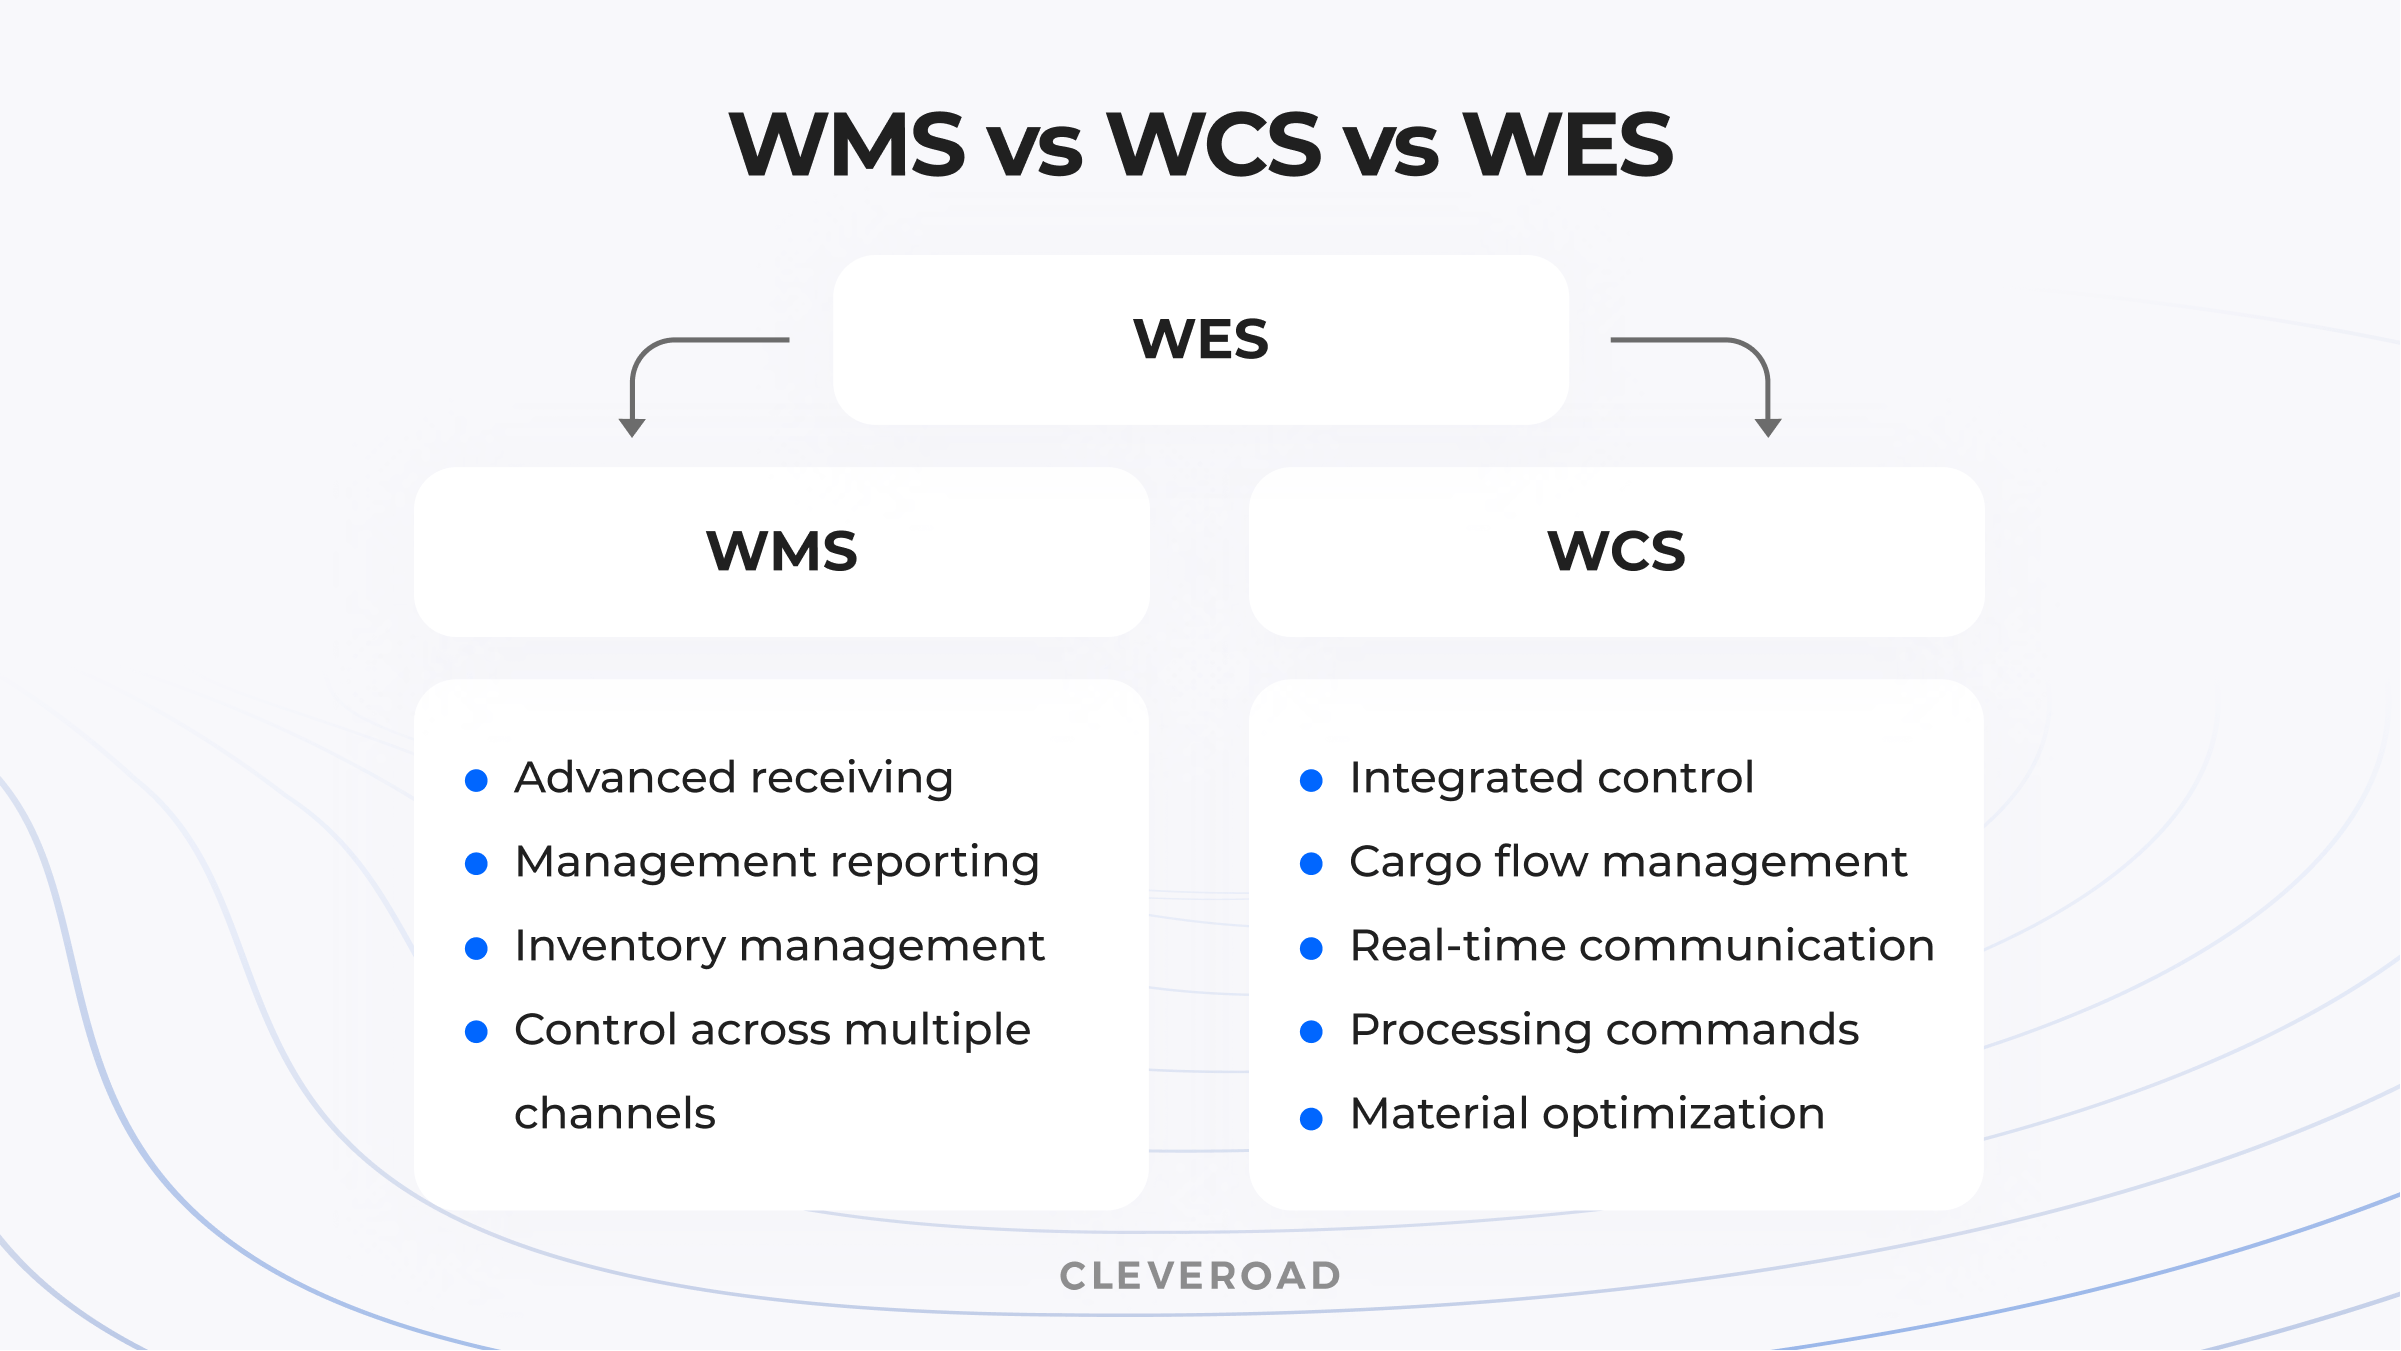 WMS vs WCS vs WES compared